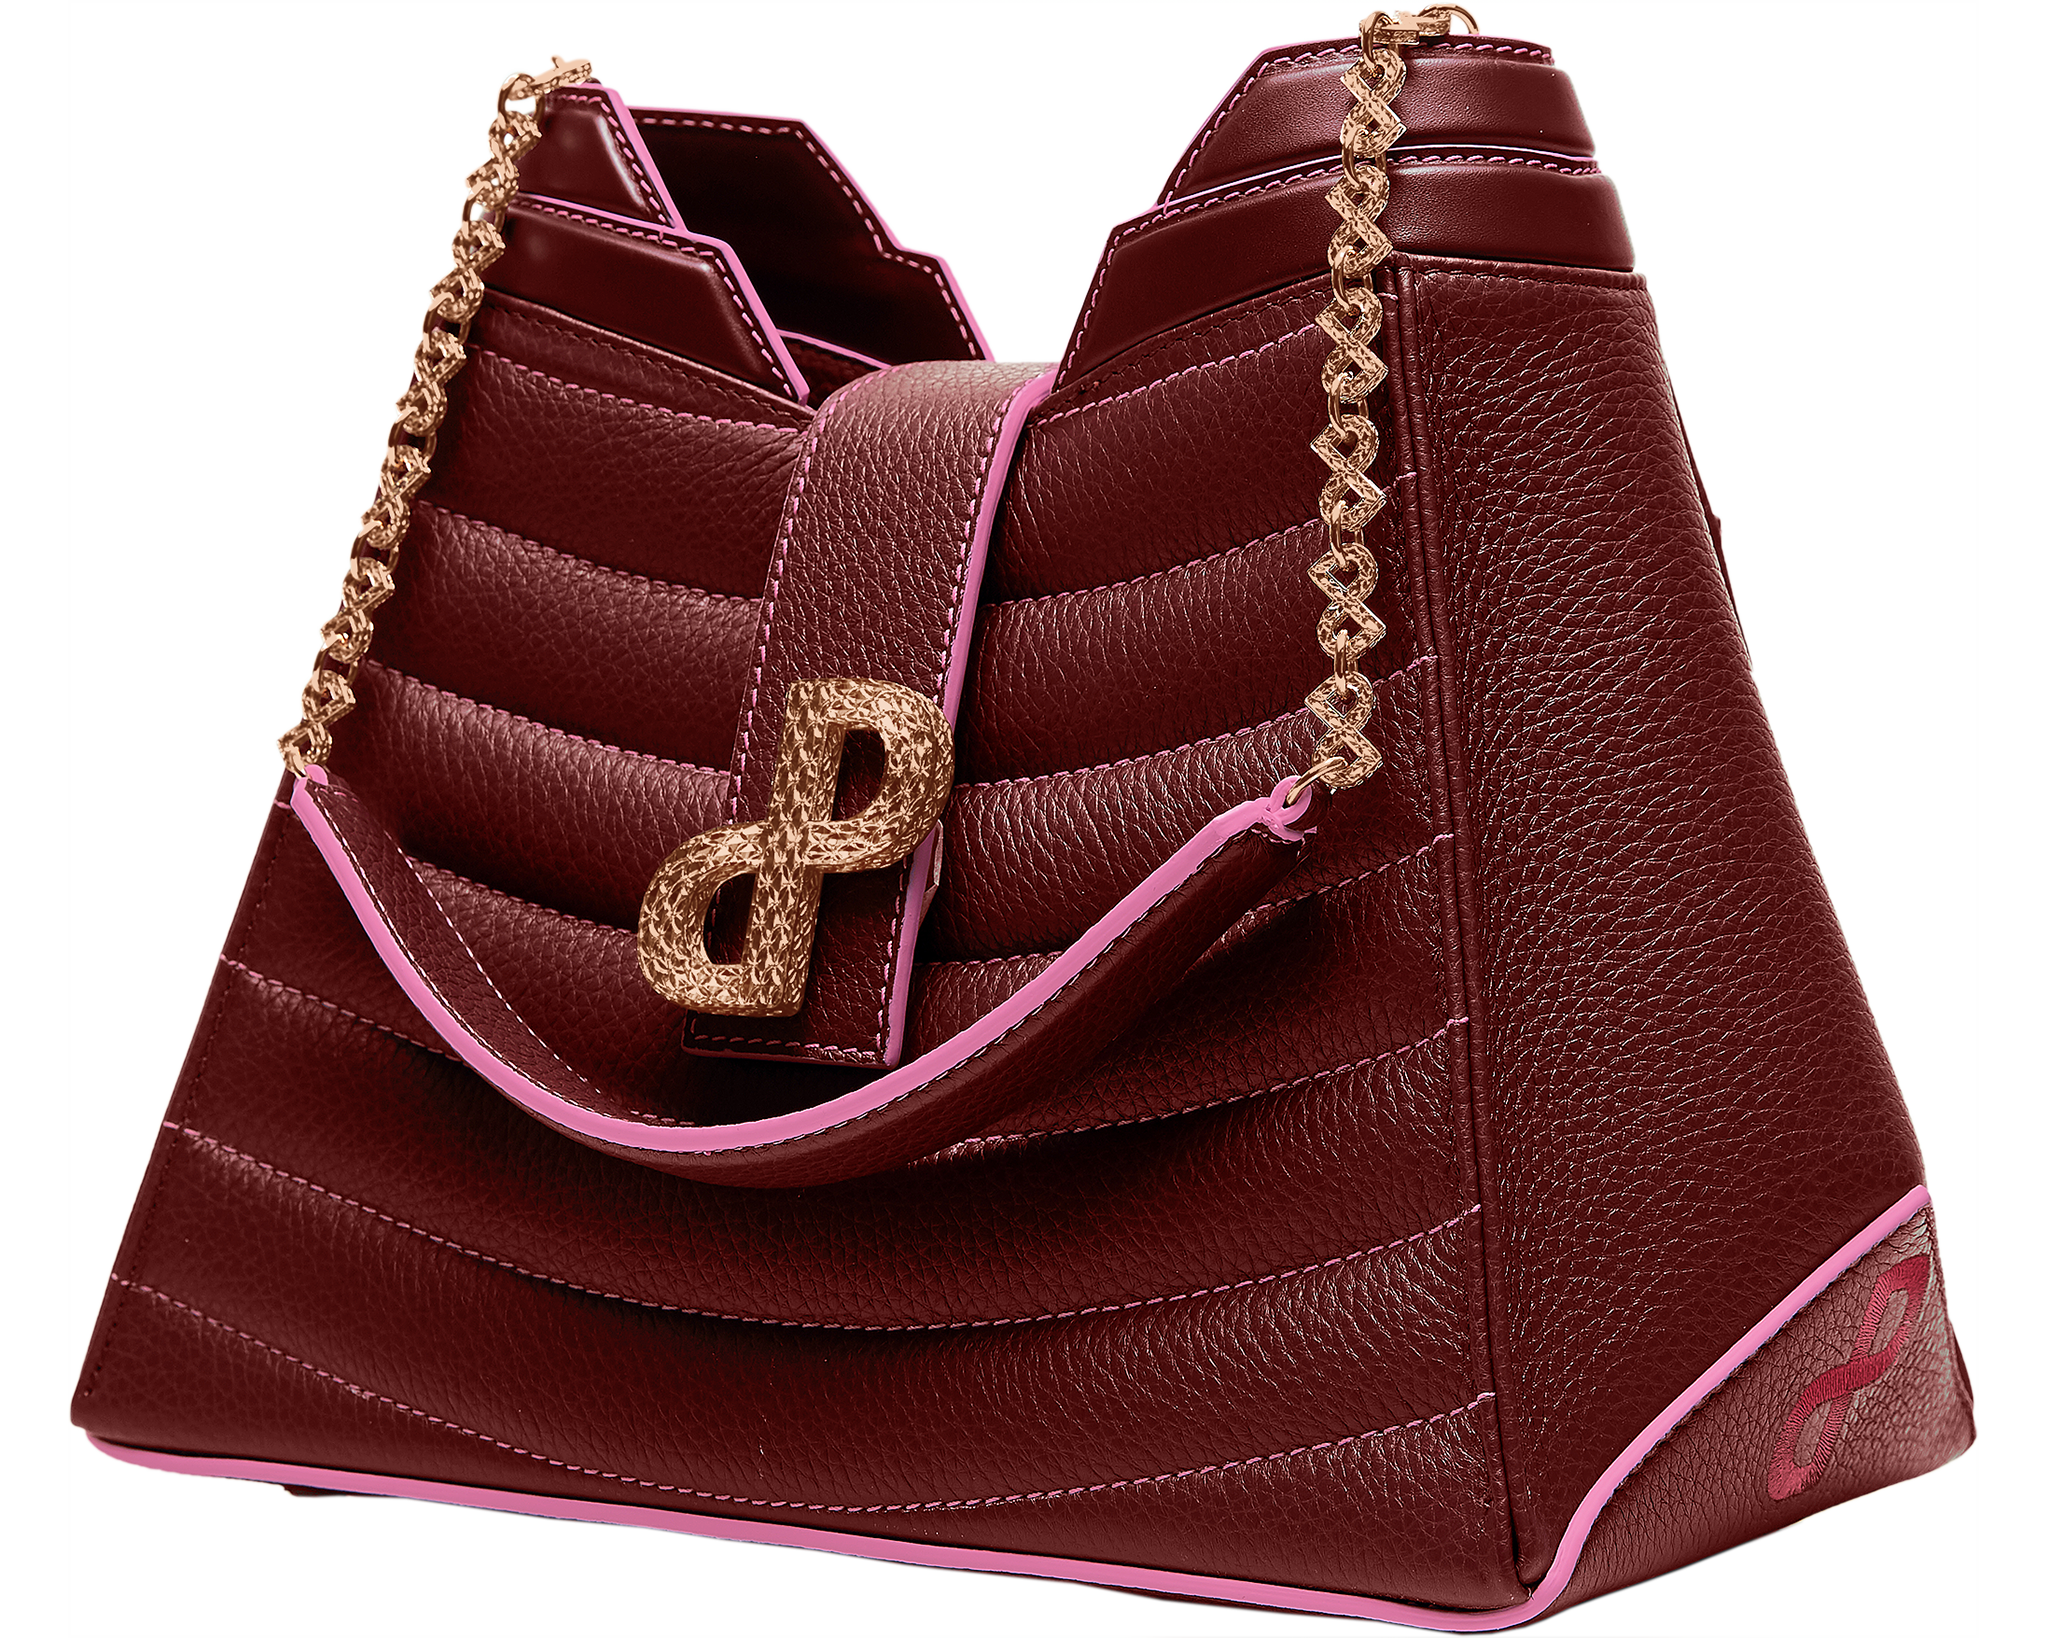 ANNIA Luxury tote bag in 3D hardware-A regal statement piece-All MADE IN ITALY 